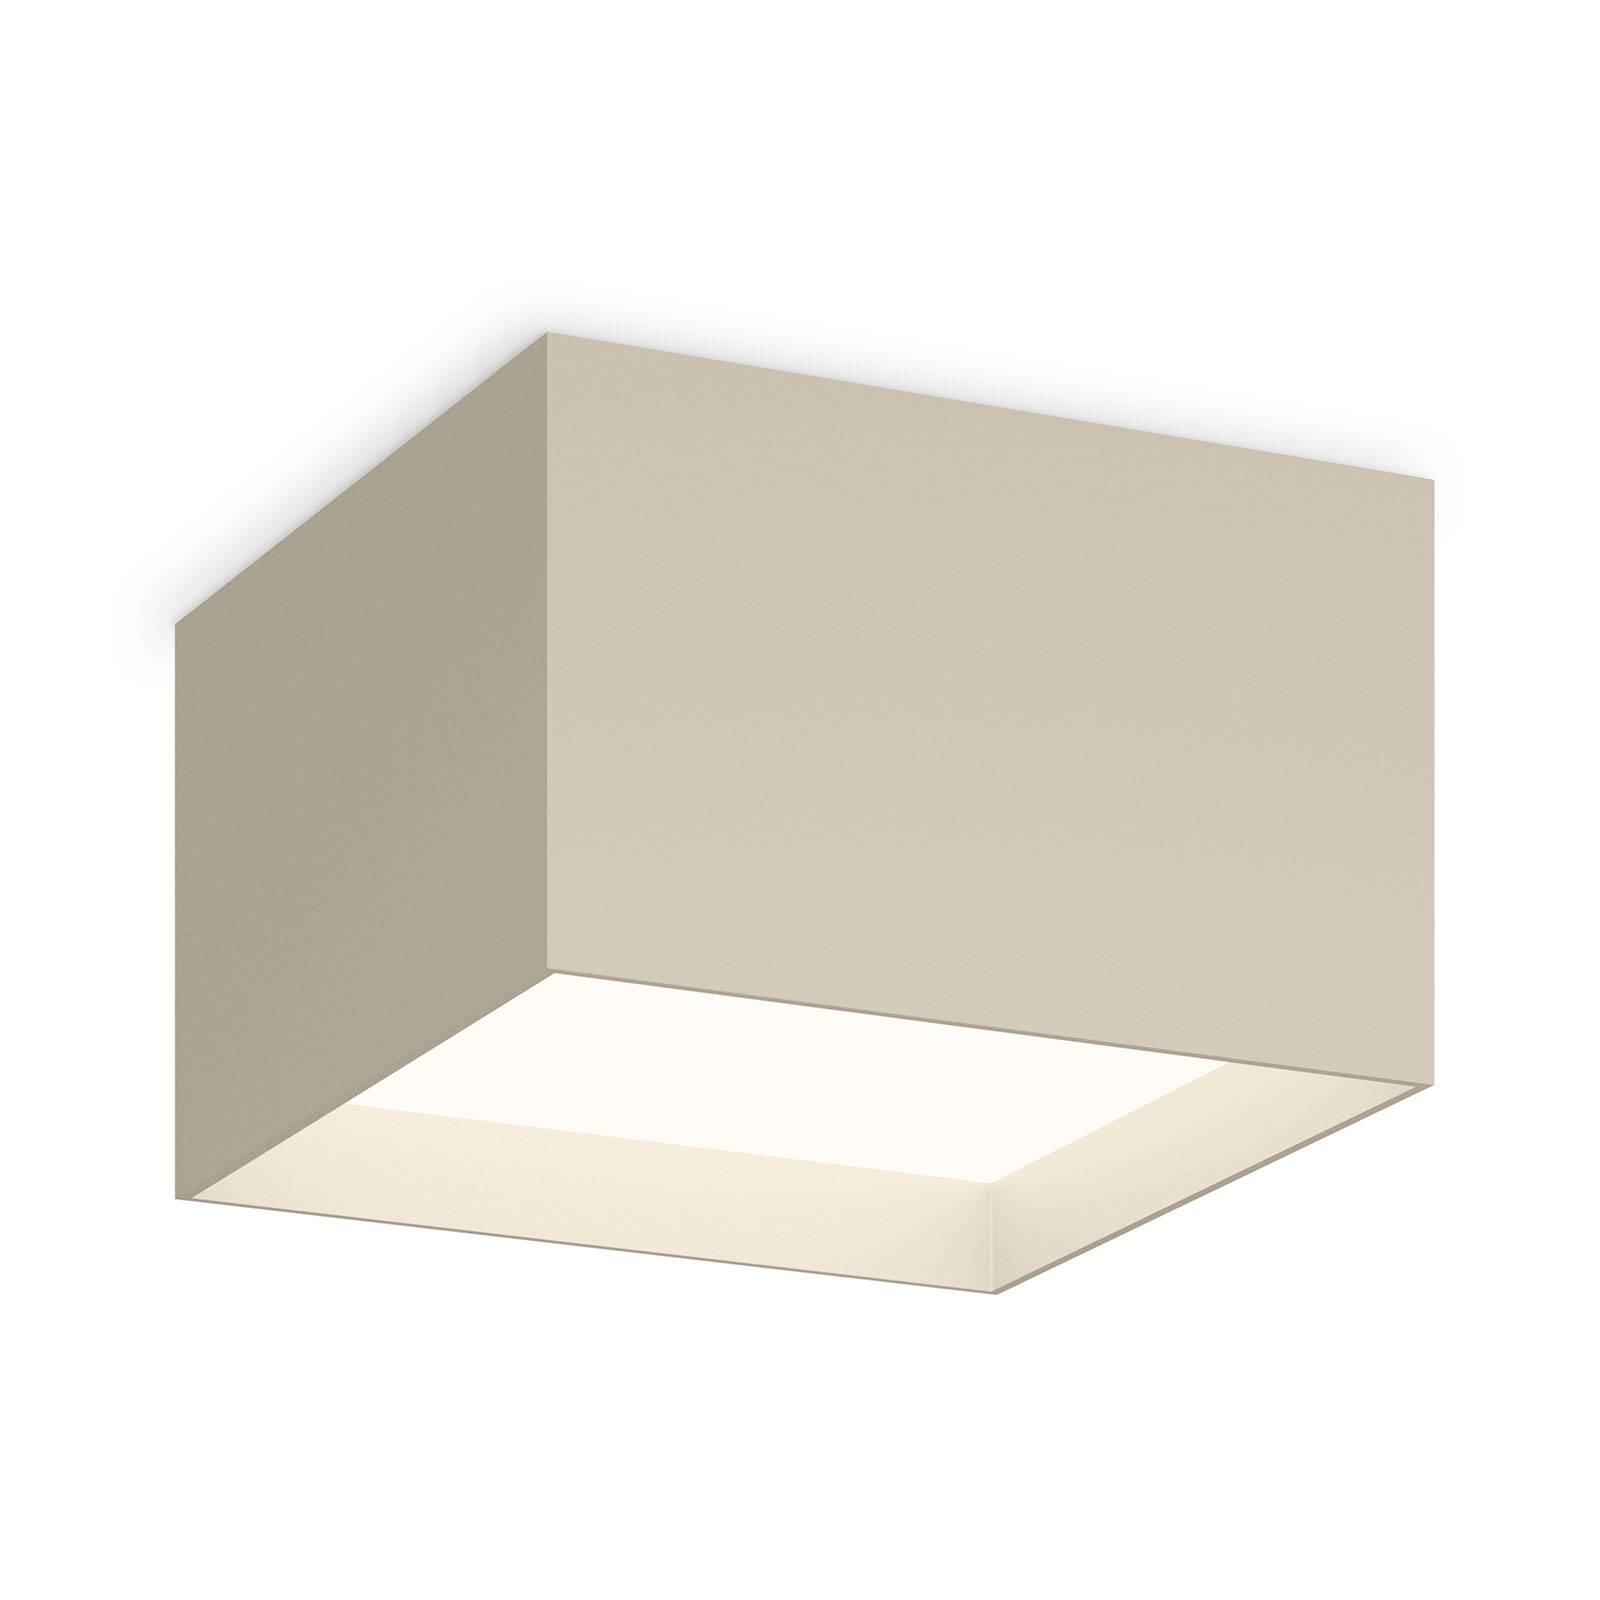 Vibia Structural 2632 taklampe 24 cm lysegrå